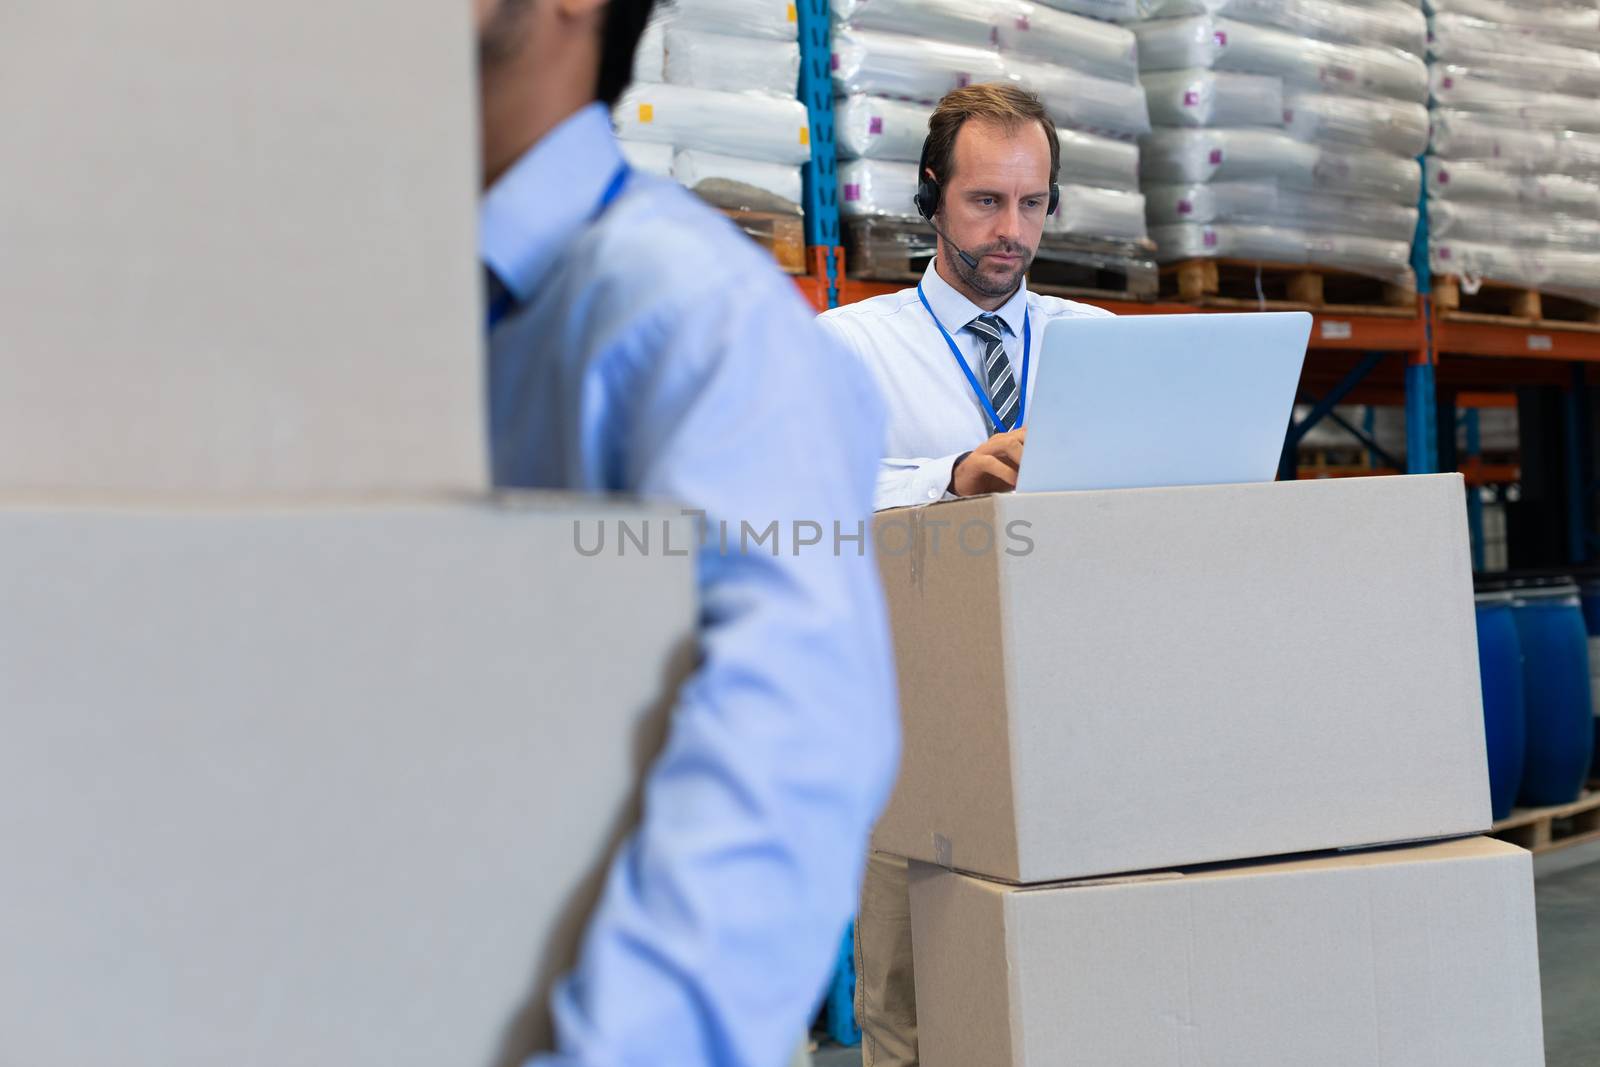 Front view of handsome mature Caucasian male supervisor with headset working on laptop in warehouse. Asian male worker holding cardboard boxes on the foreground. This is a freight transportation and distribution warehouse. Industrial and industrial workers concept